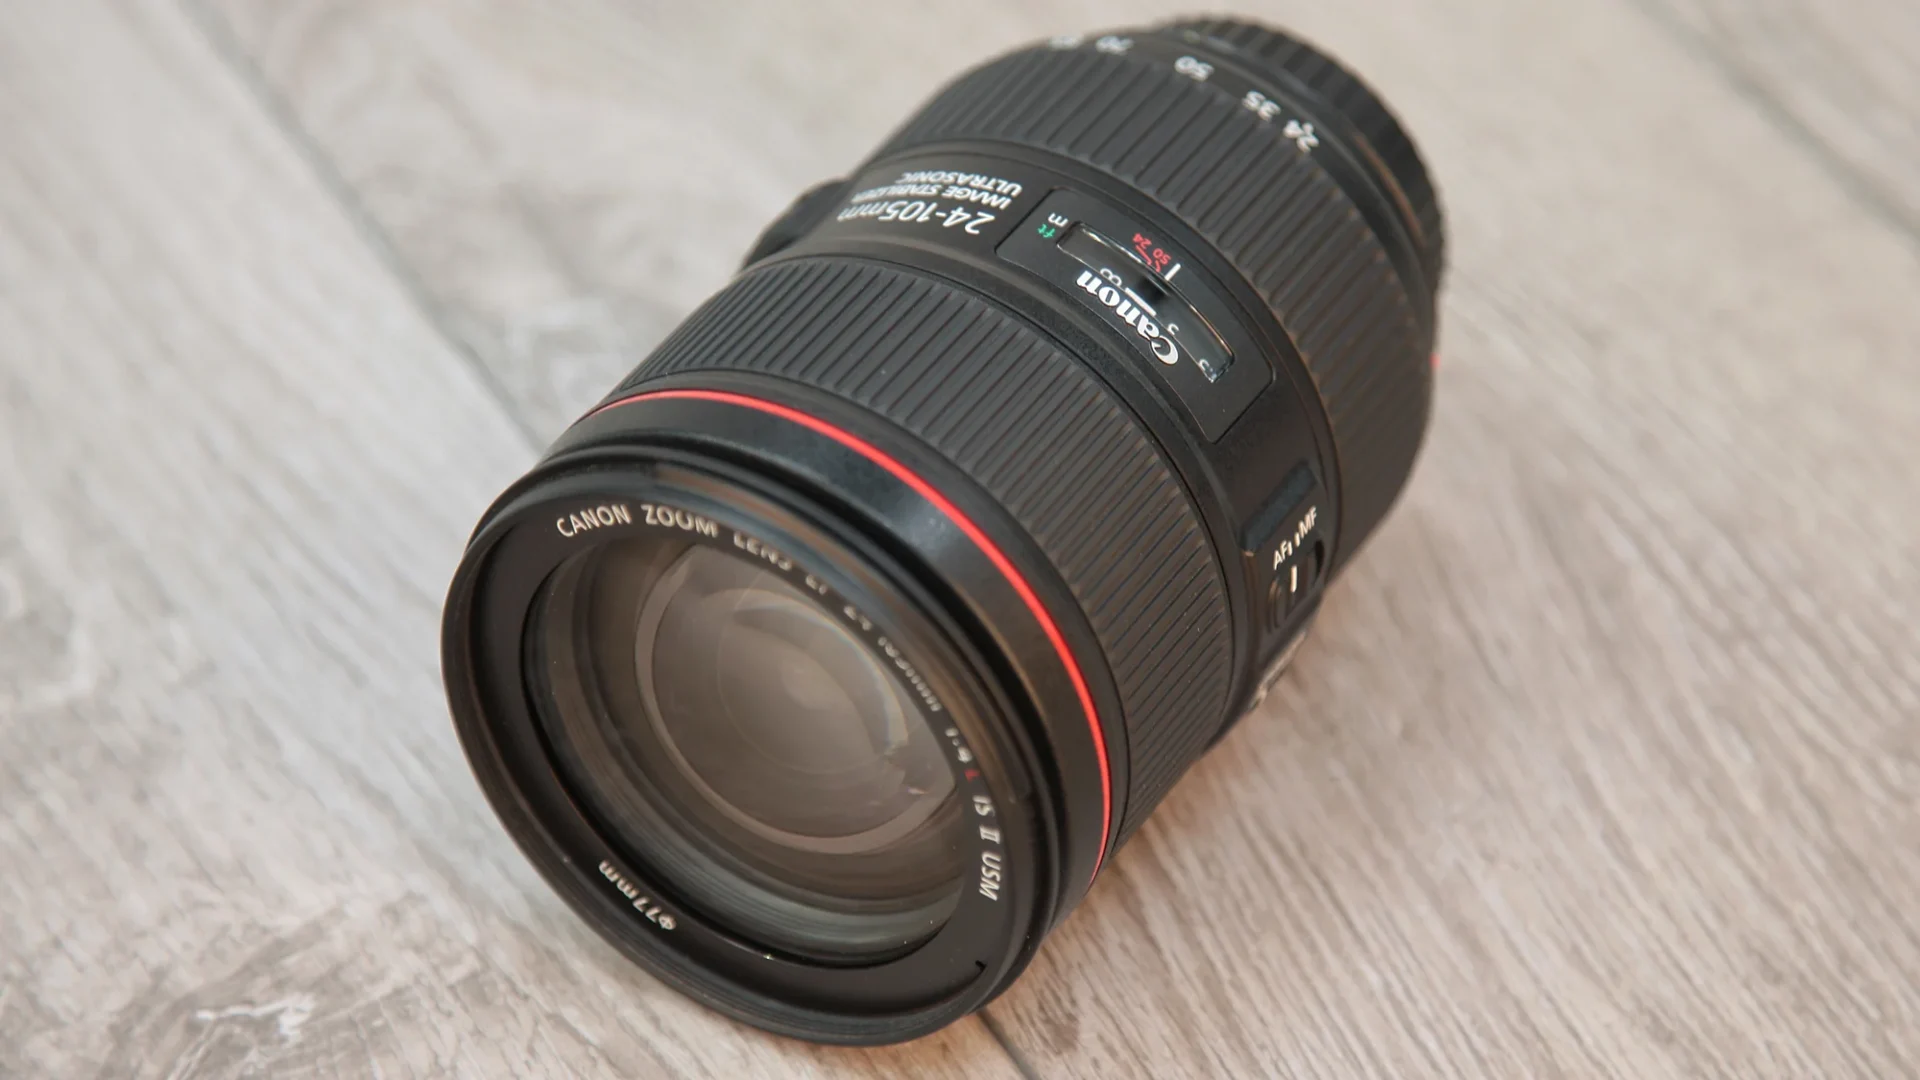 canon ef 24-105mm f/4l is usm ii